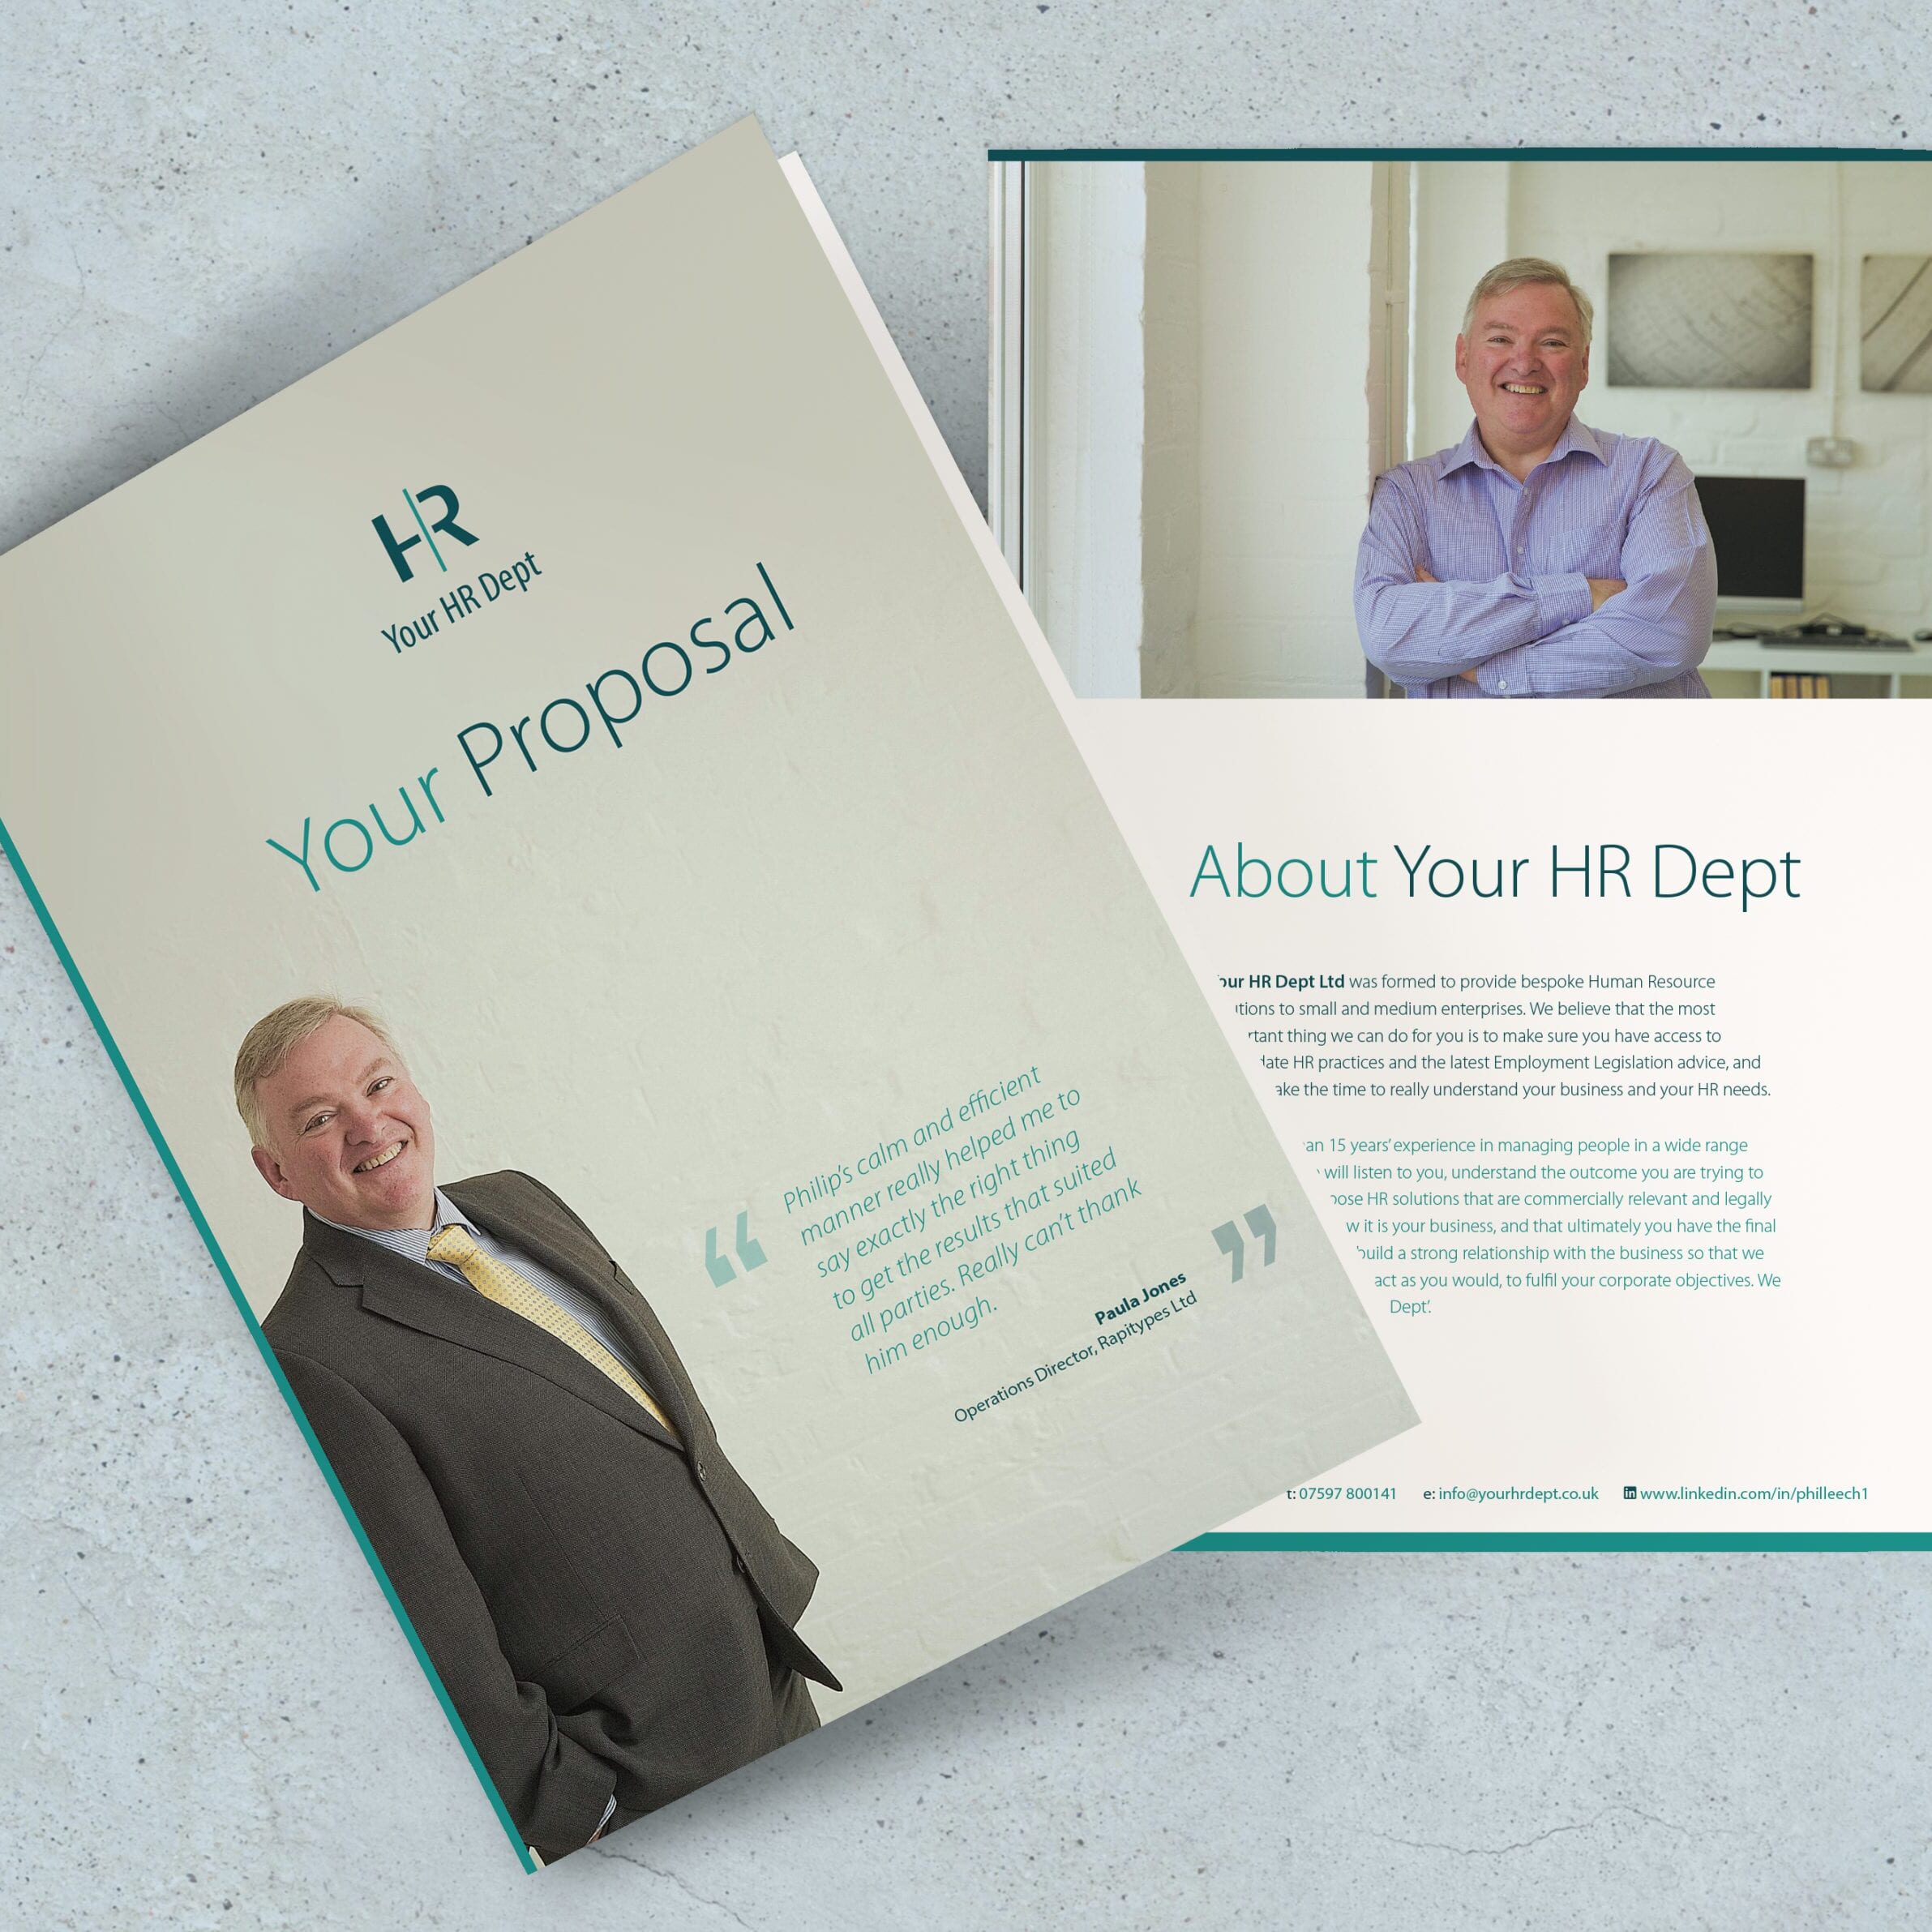 Proposal covers design for Your HR Dept